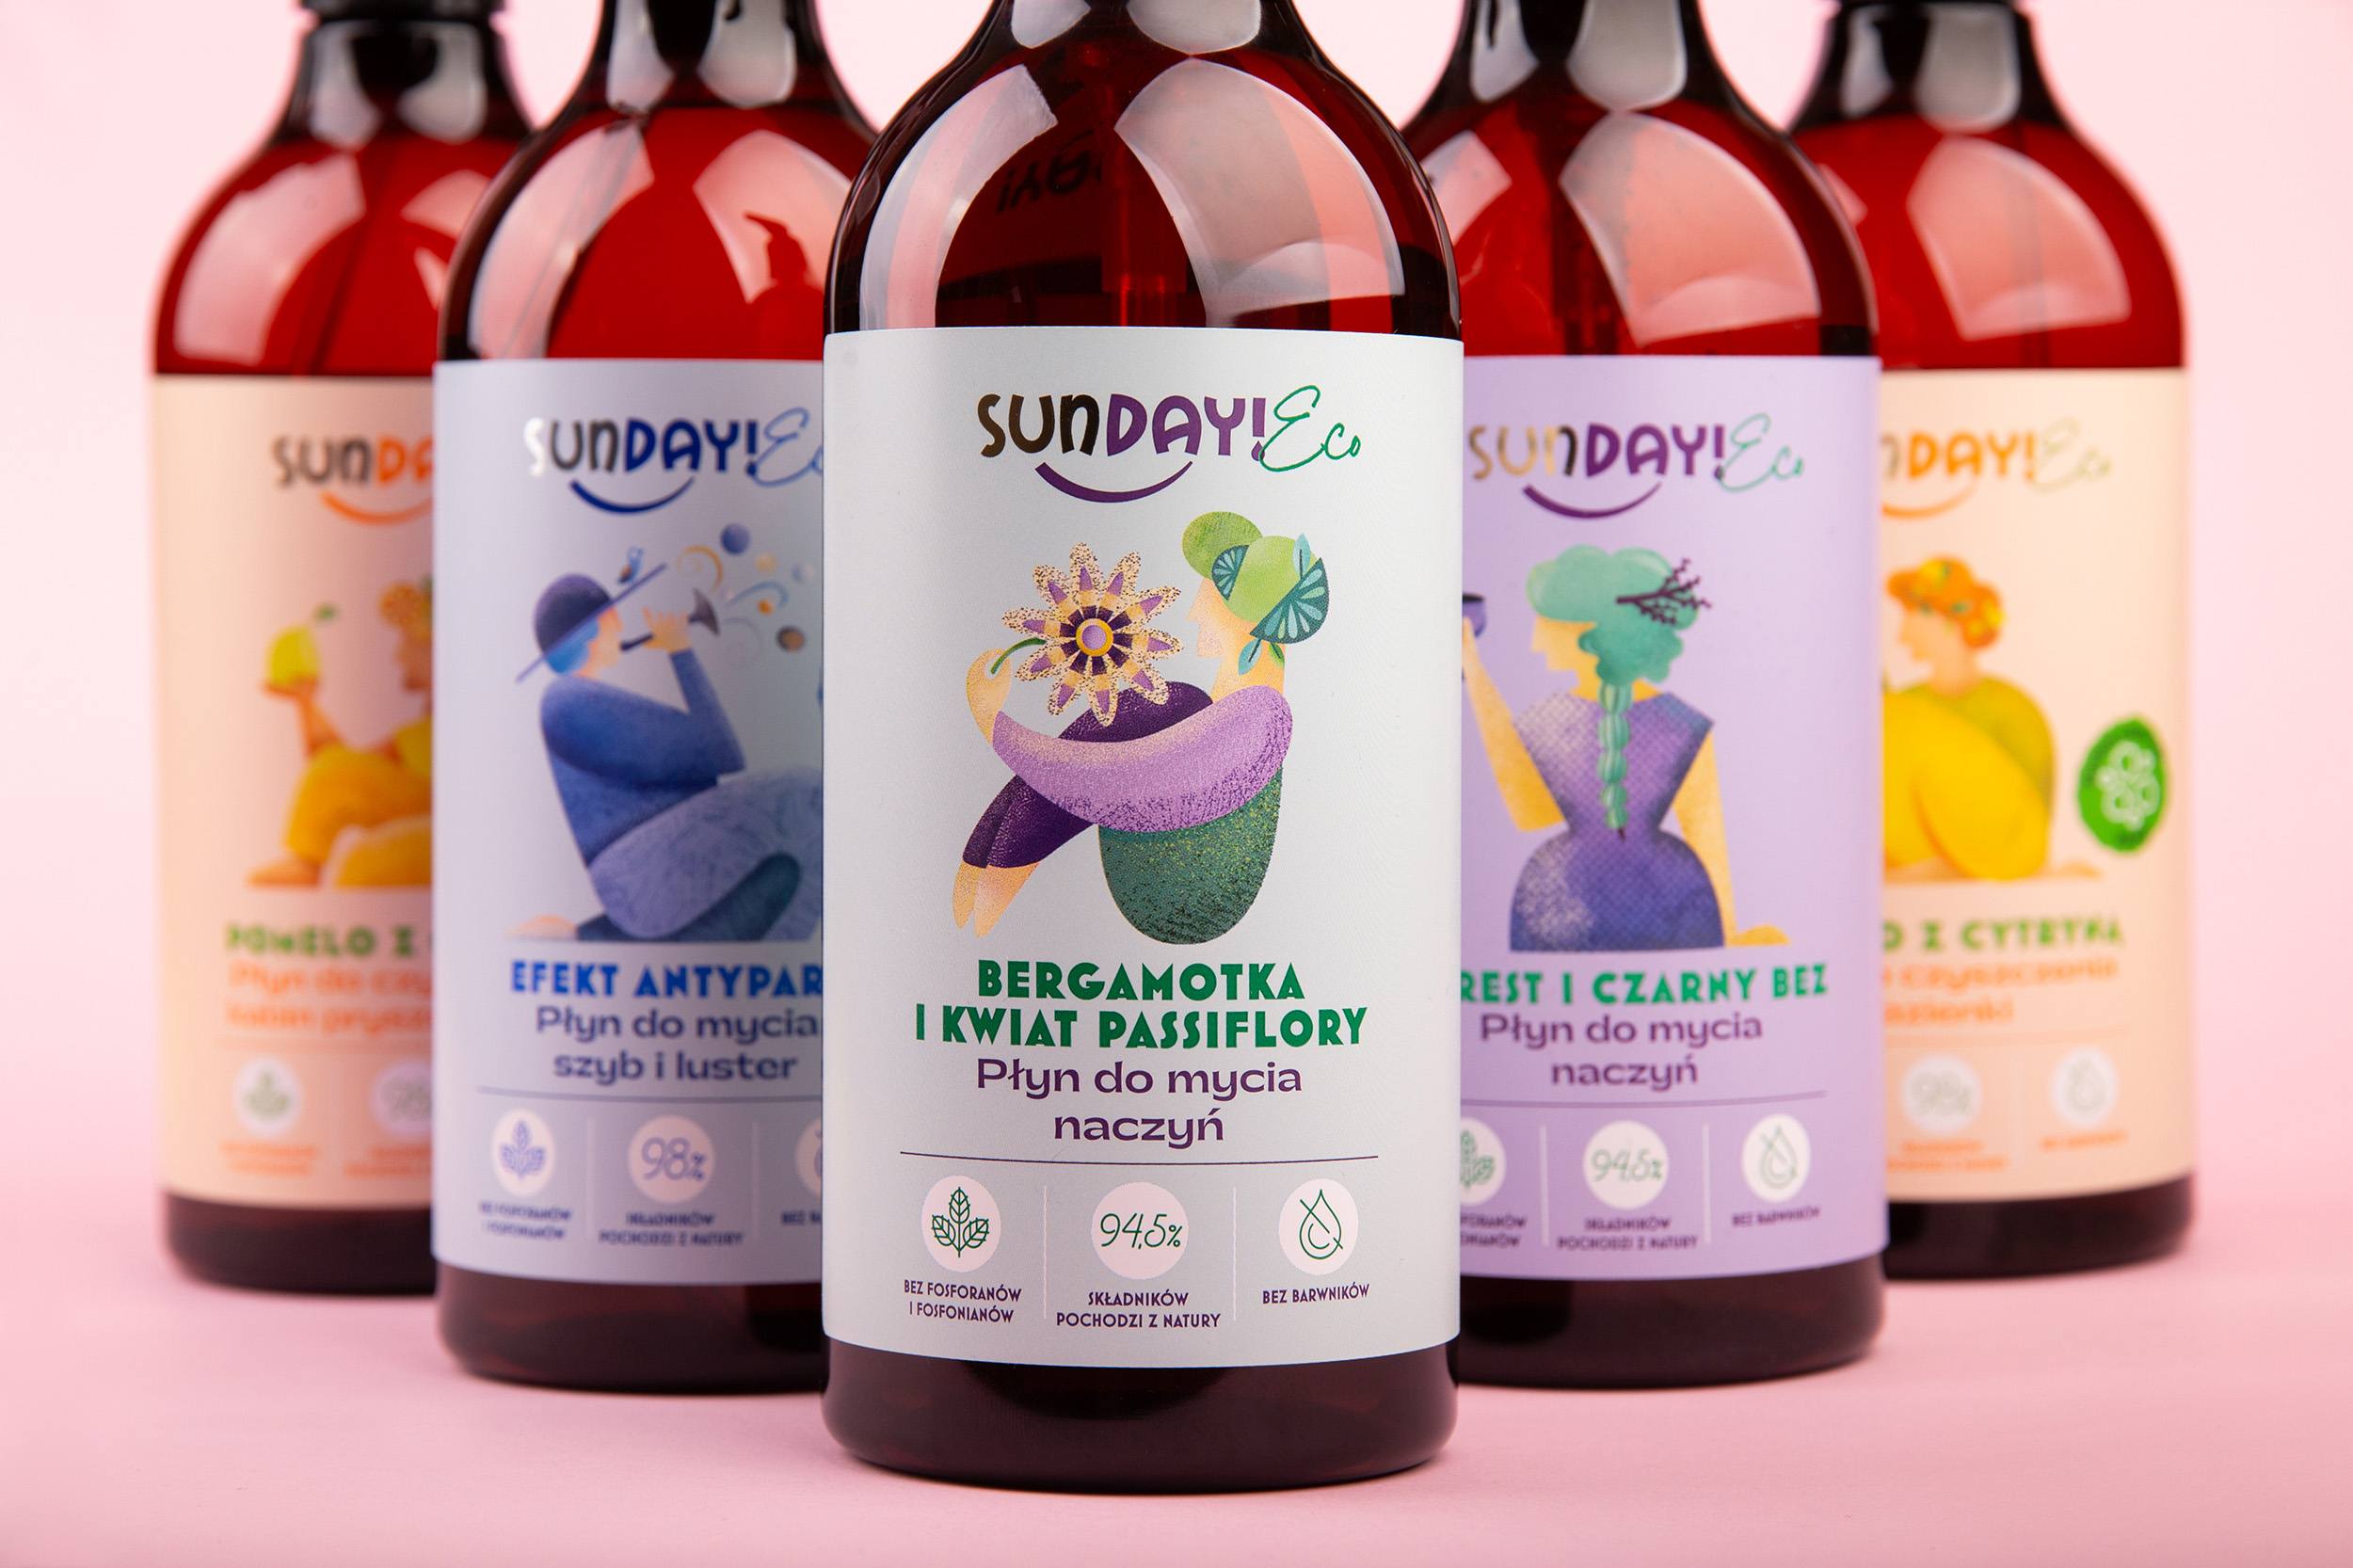 Super-Pharm Sunday Eco Cleaning Products Branding, Illustrations and Packaging Design